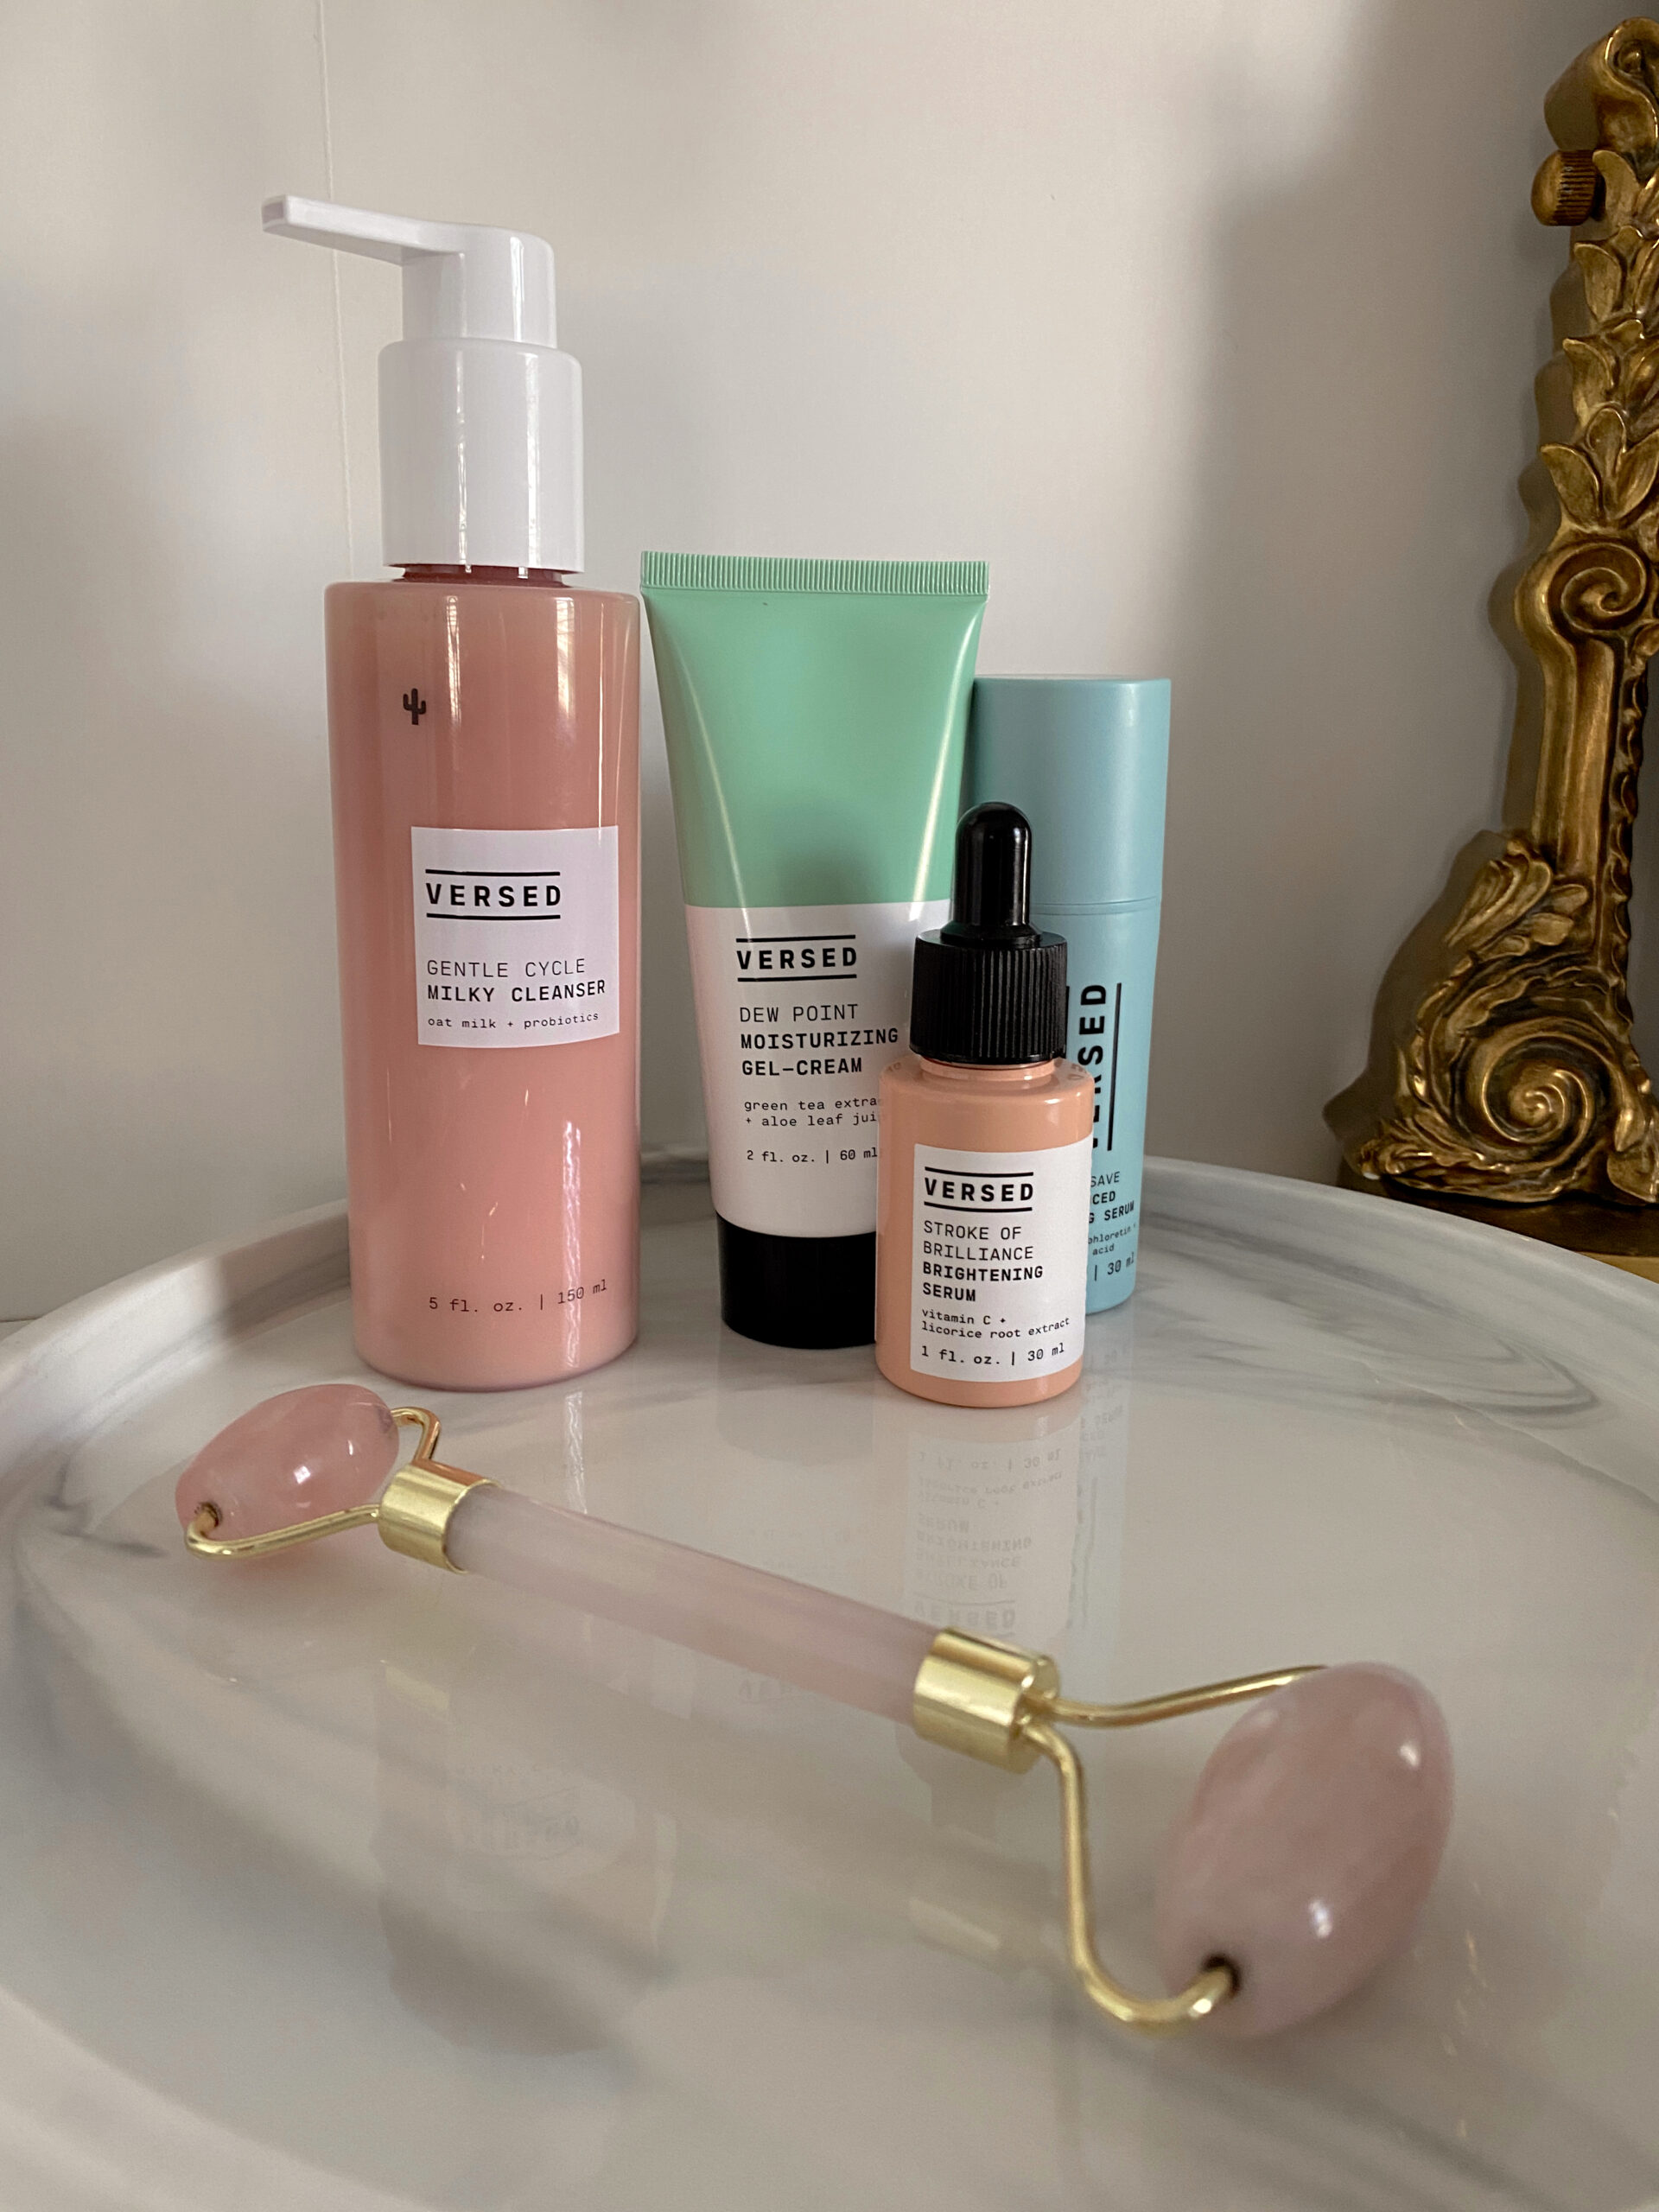 the Girl this Summer with My Morning Care Routine - Jessica Cobabe | Ethical Fashion and Brand Stylist